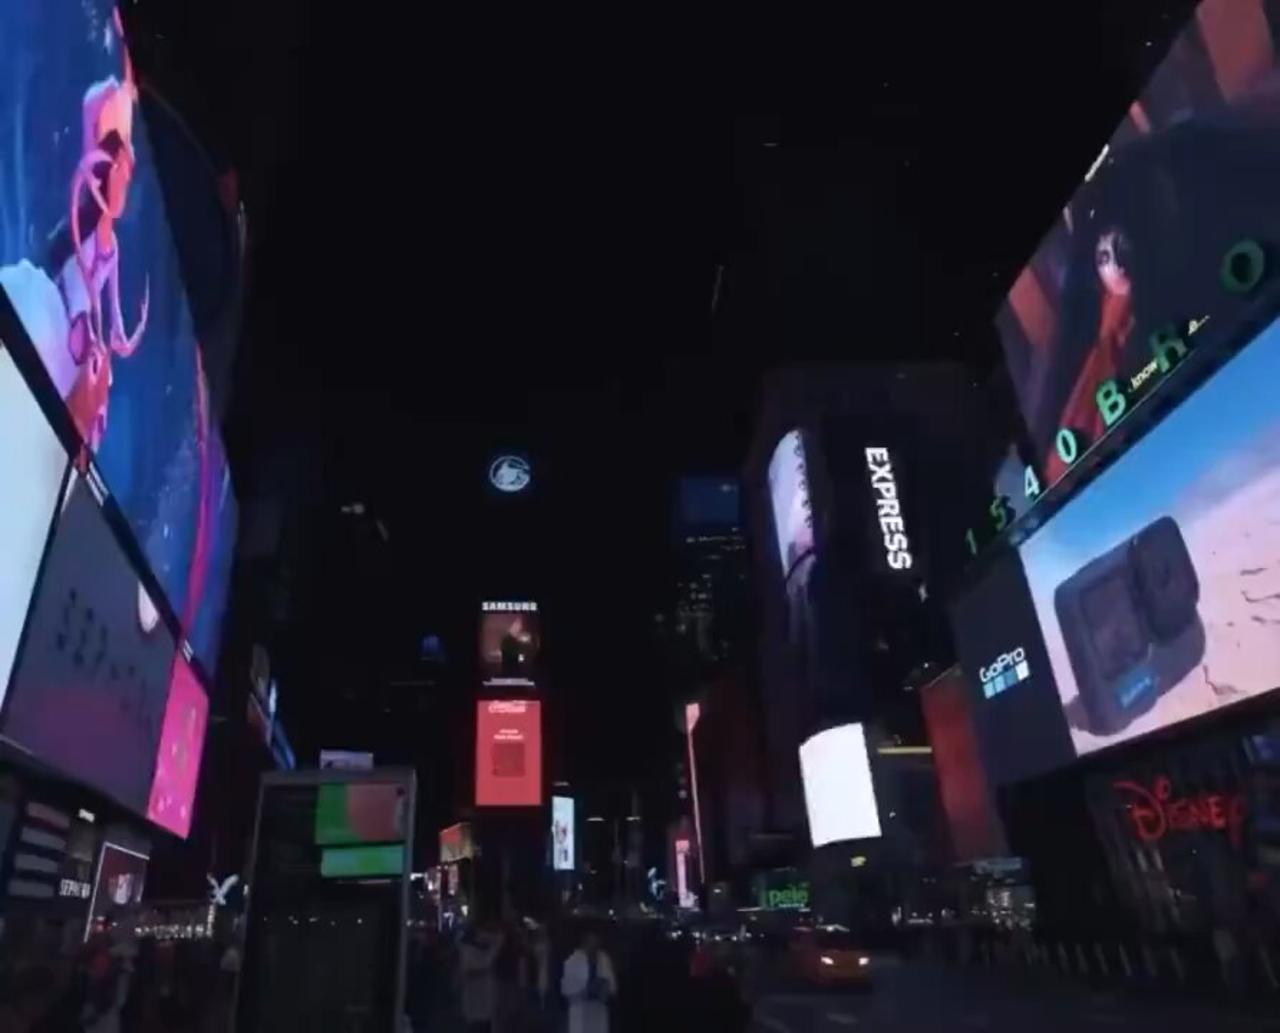 This year, for the first time, all 27 billboards of Times Square went dark in NYC, and then lit up w